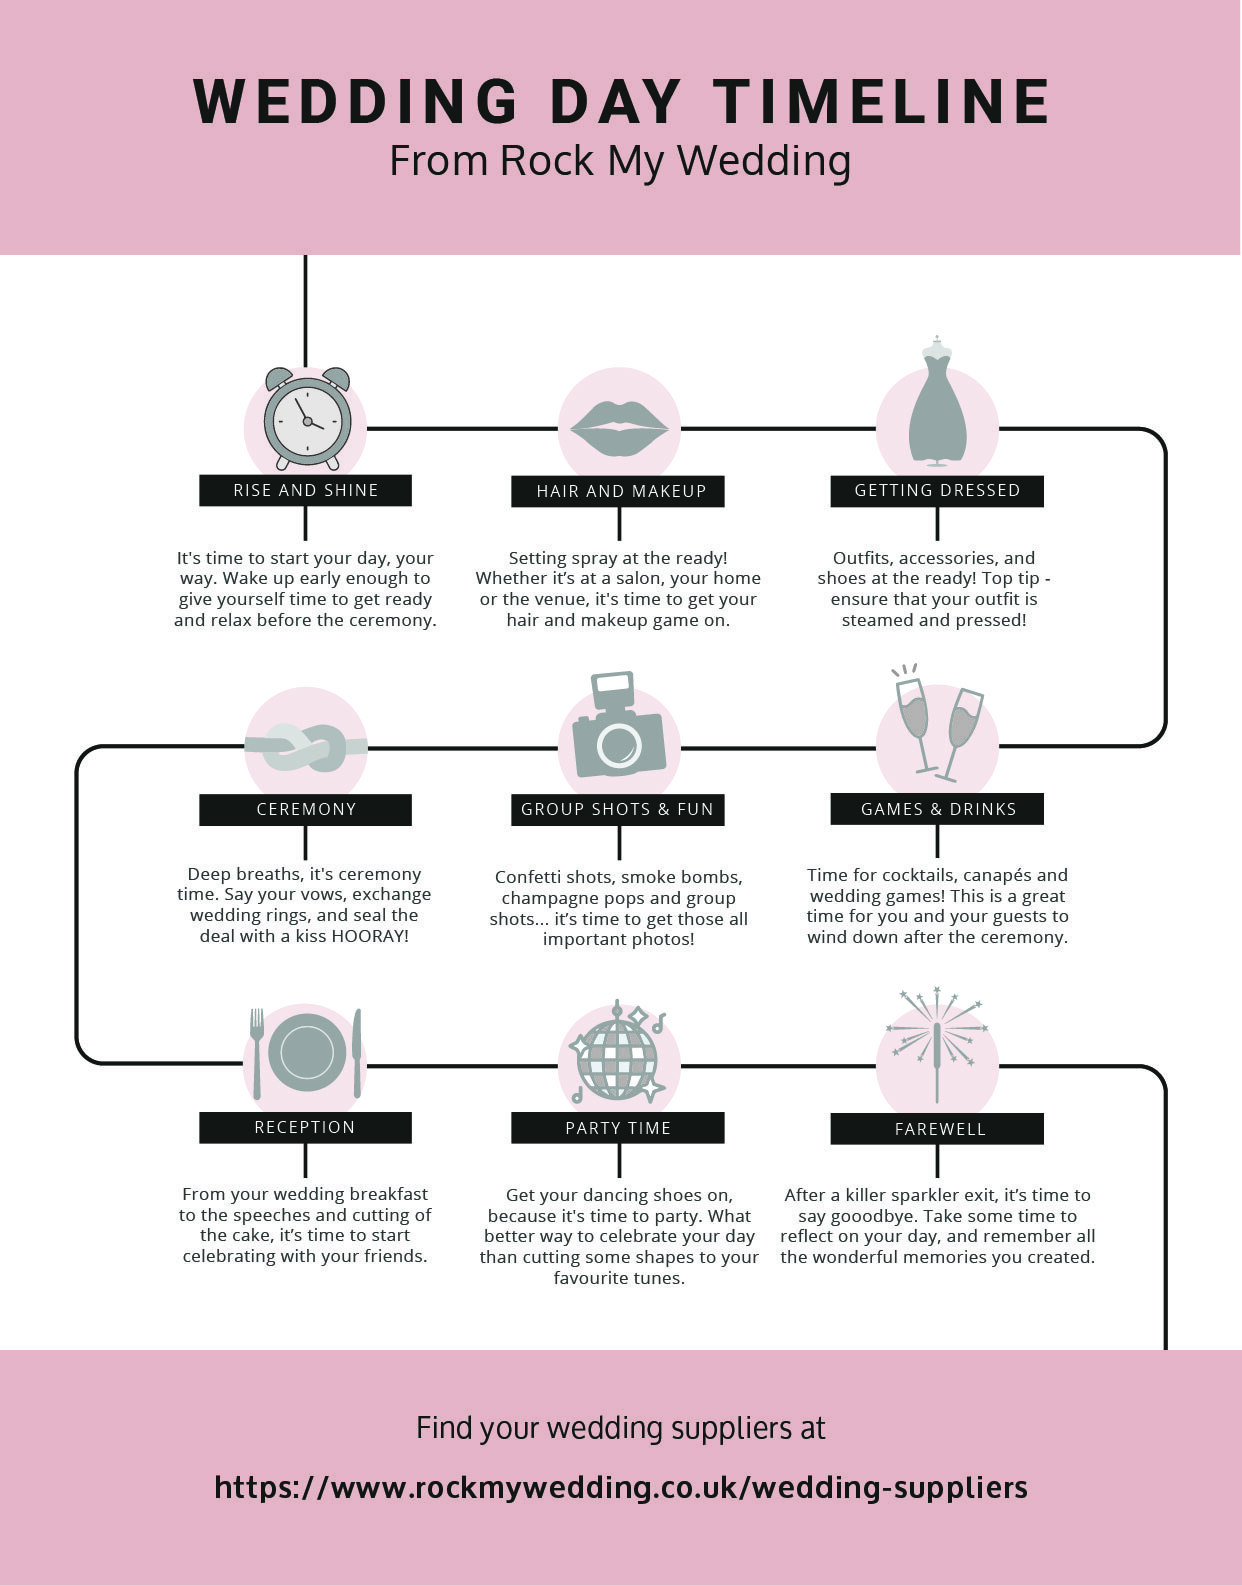 Infographic detailing the timeline of wedding day from waking up to your wedding disco